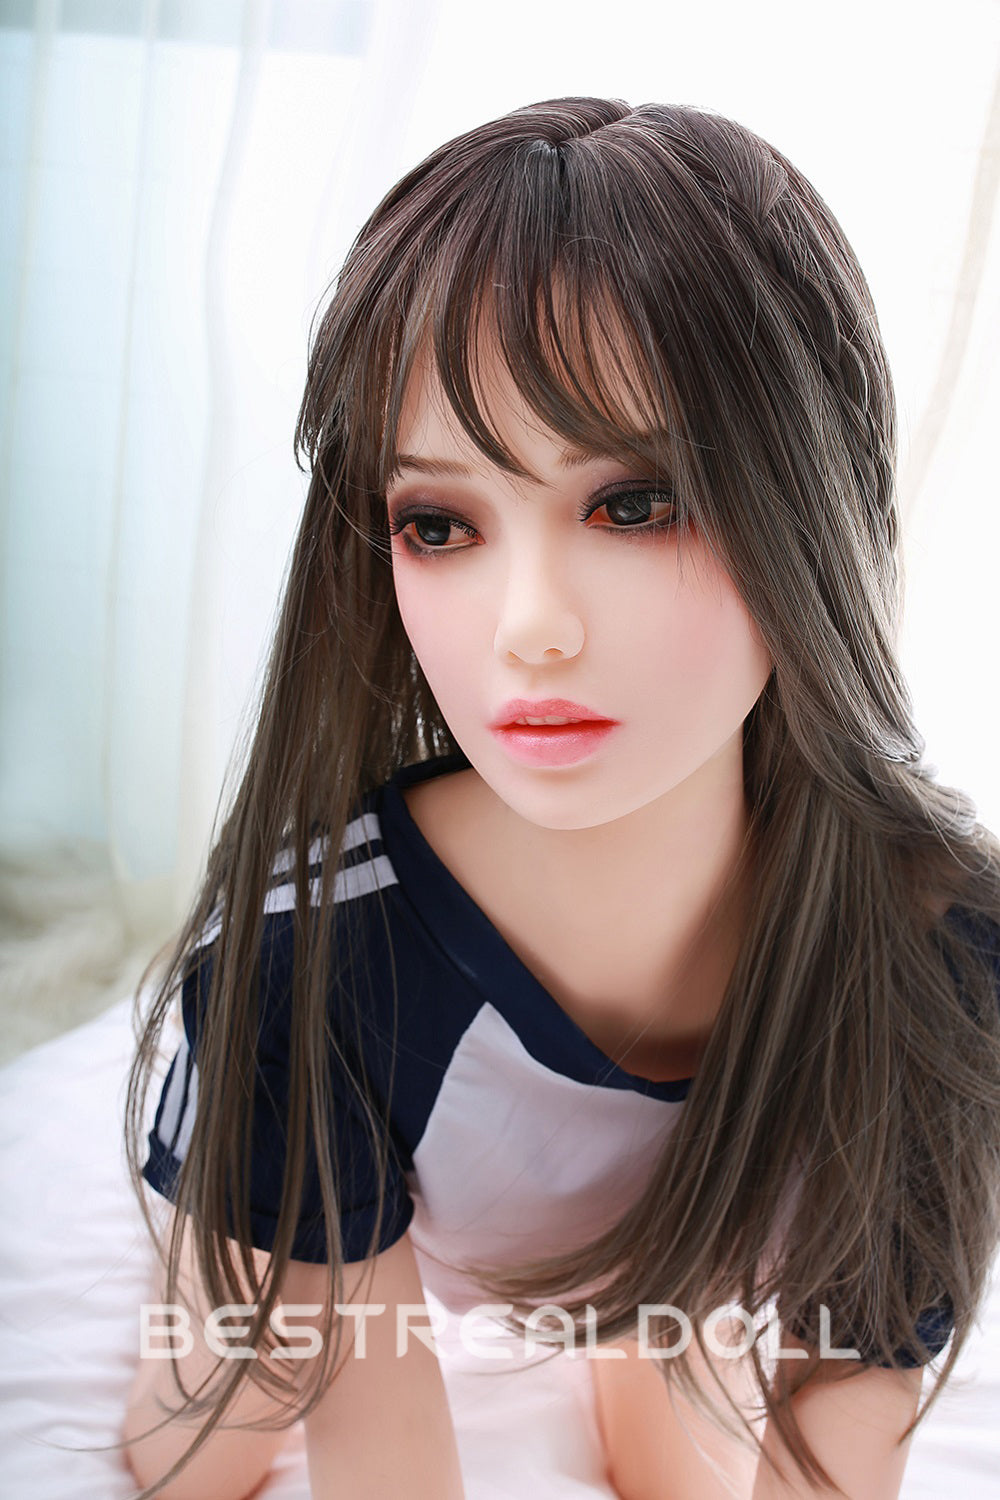 US Stock - 150cm Realistic Love Doll Small Breasts Carrie #144 TPE Sex Doll